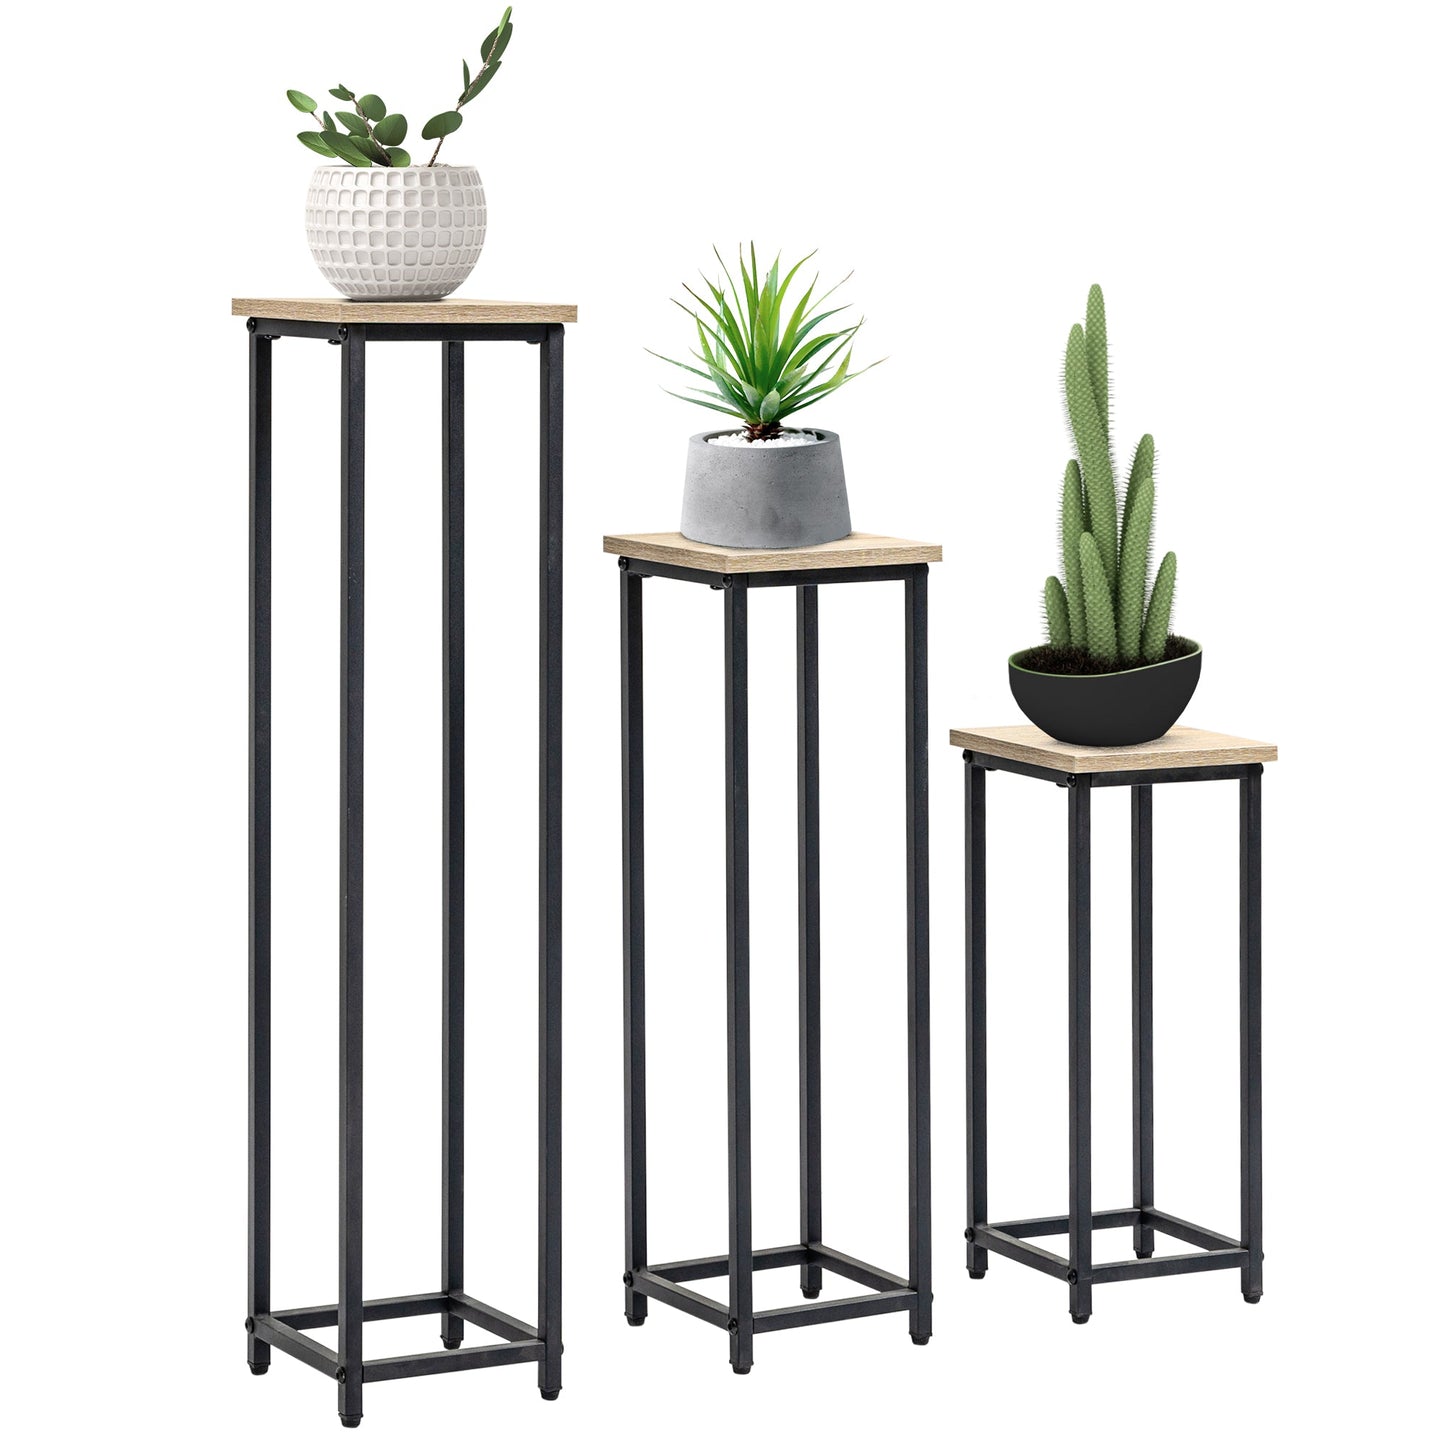 Outdoor and Garden-Set of 3 Outdoor Plant Stand, Display End Table, Plant Shelf Corner Planter Pot Rack for Indoor Outdoor Home Patio Garden Decor - Outdoor Style Company